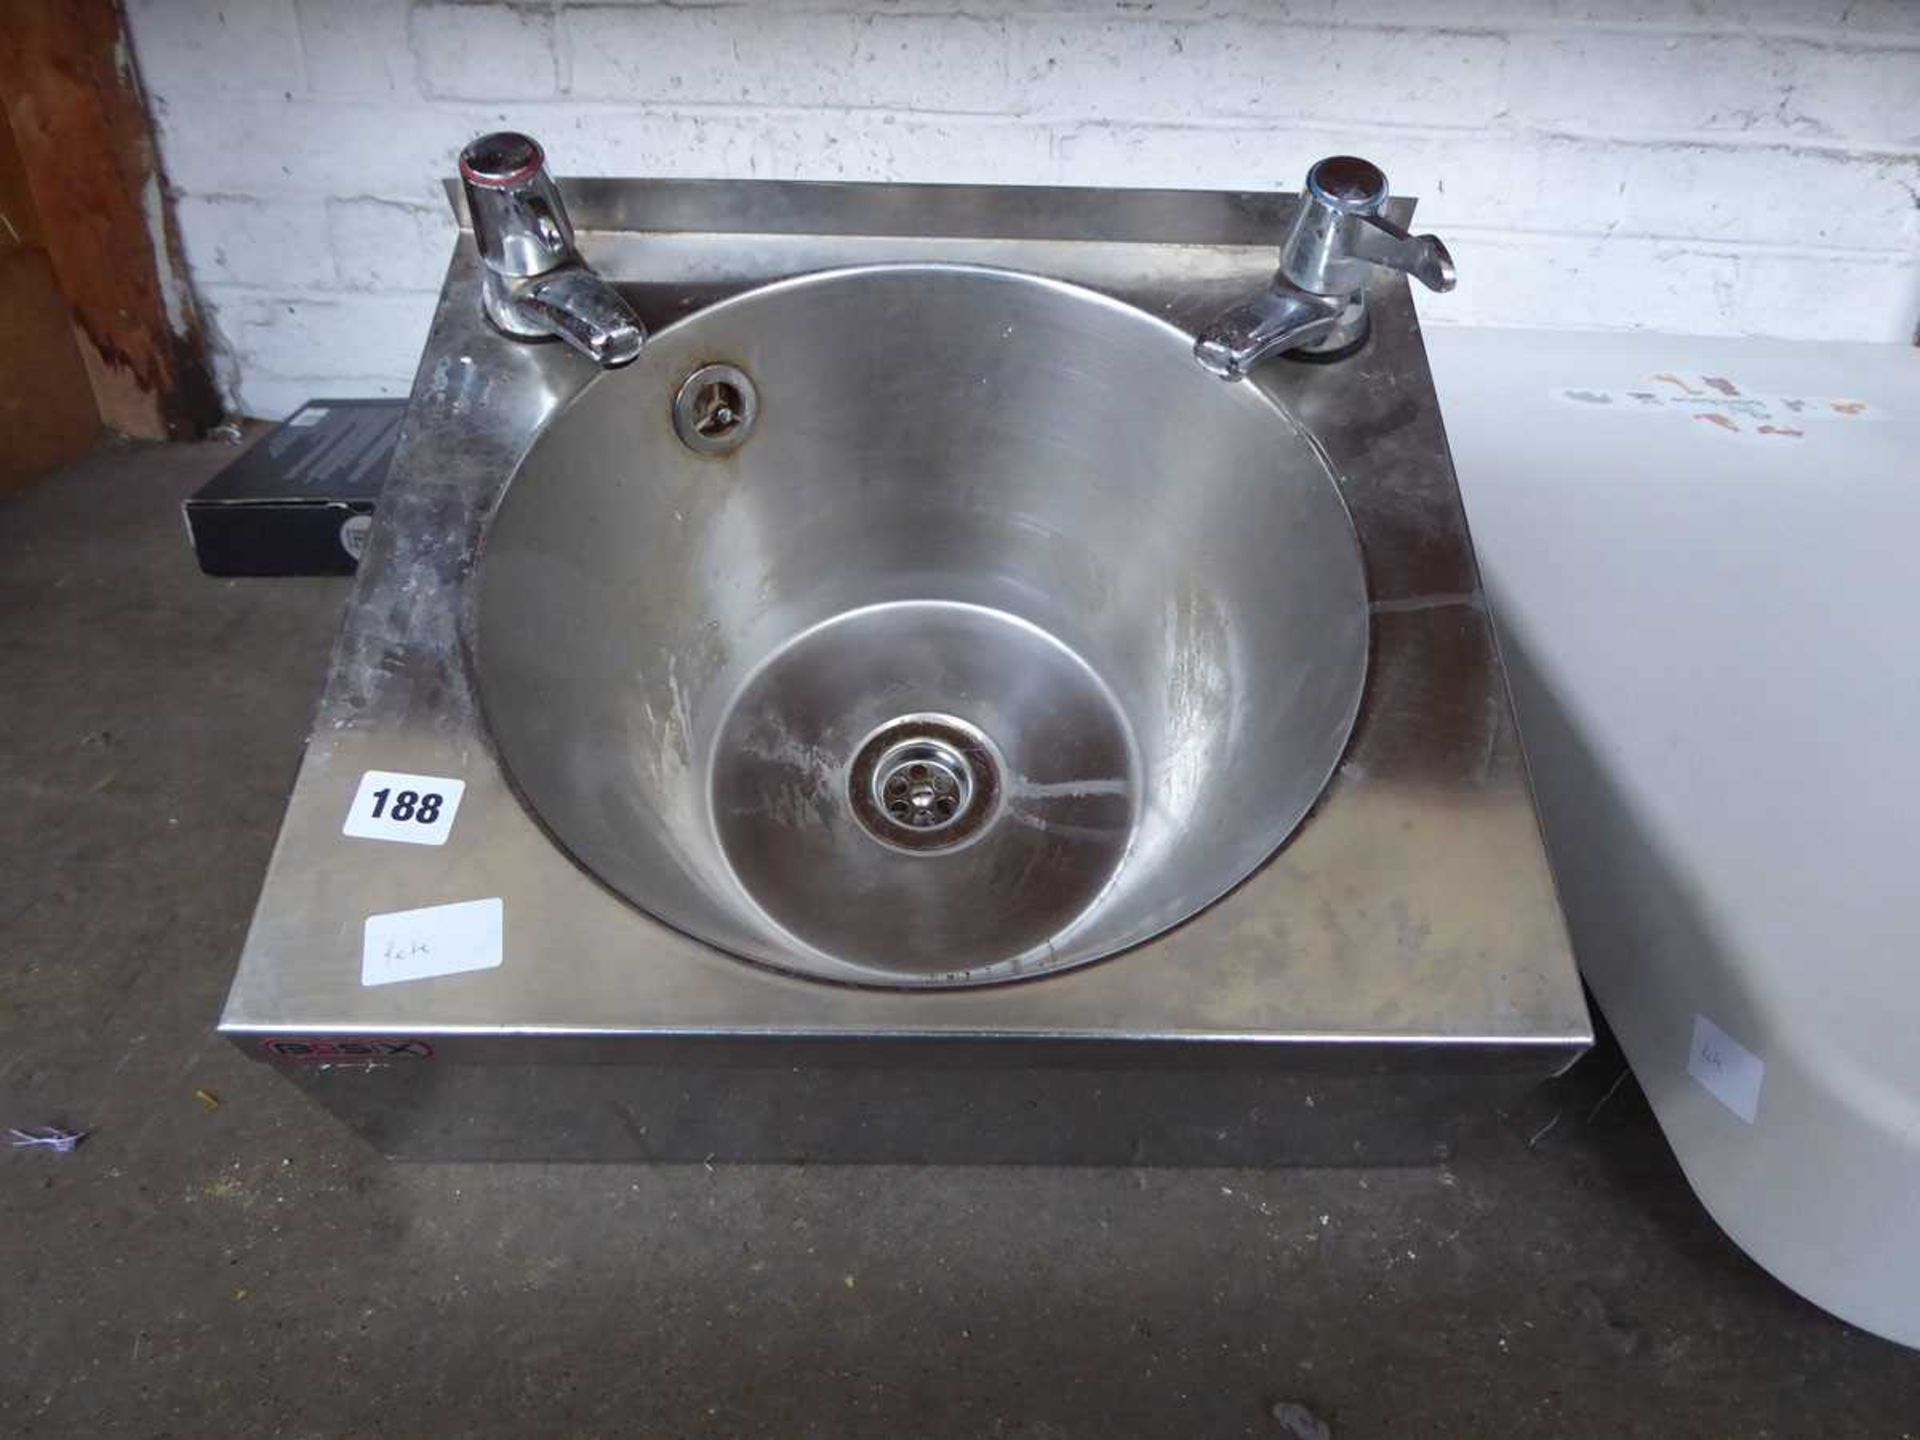 Stainless steel wall mounted hand basin with taps